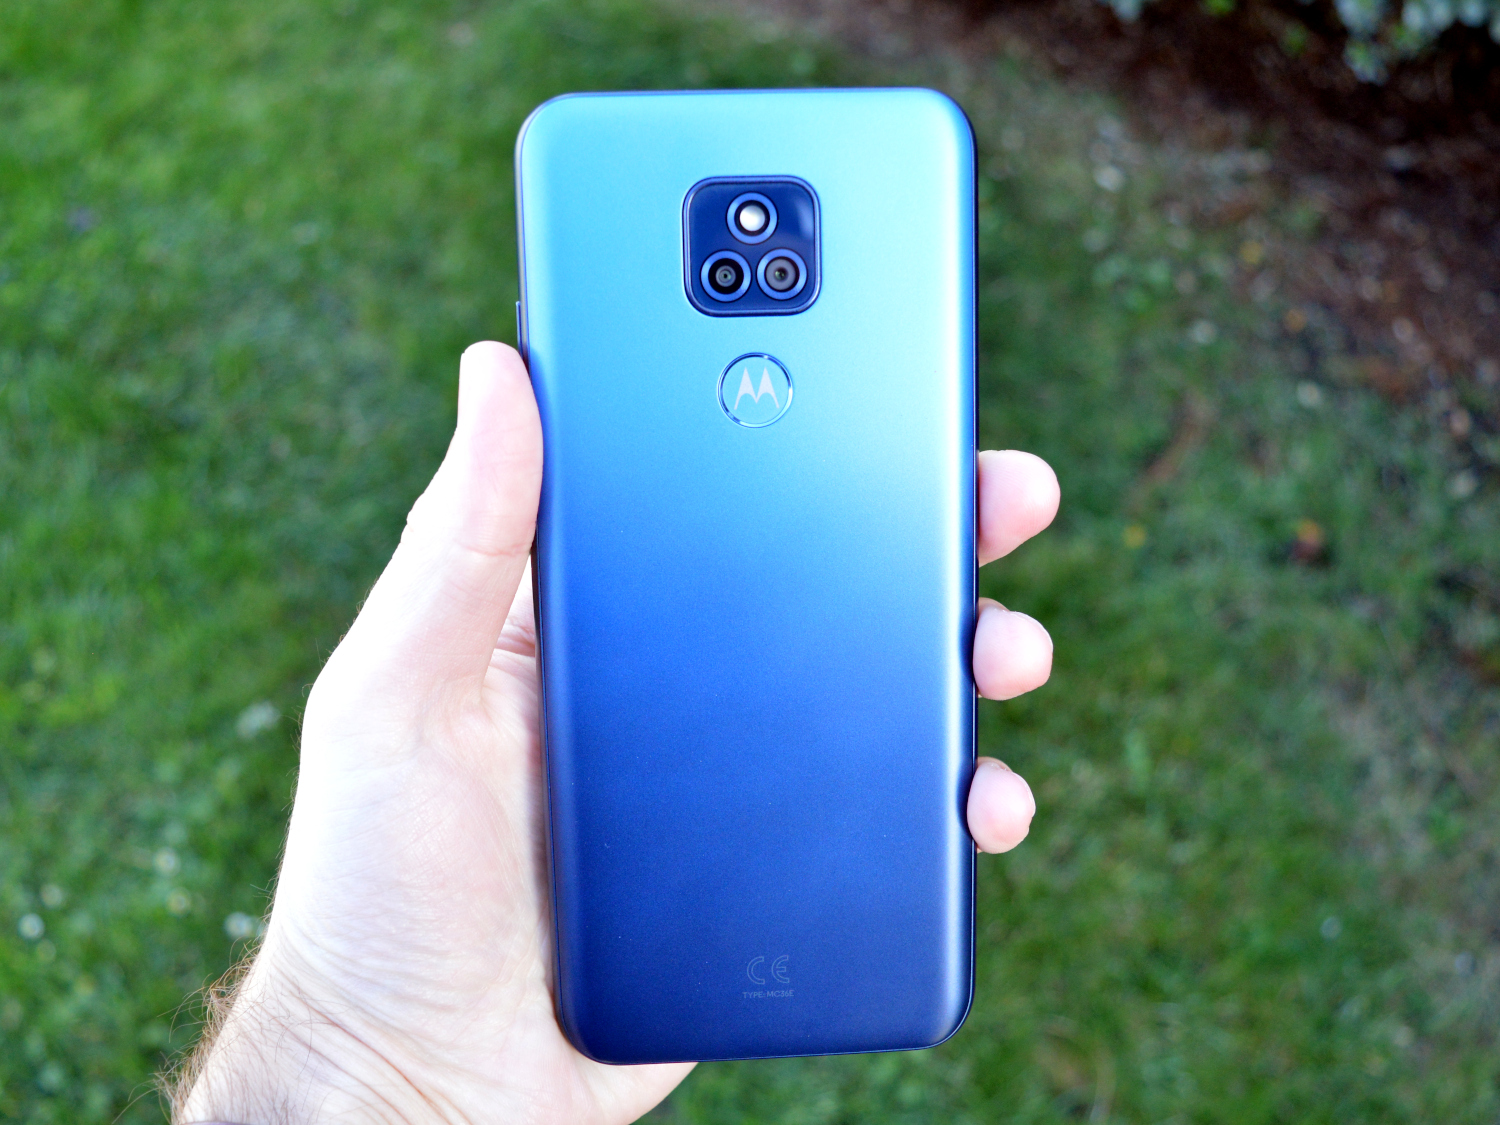 Moto G Play (2021) Review: Battery Life, Performance, Camera